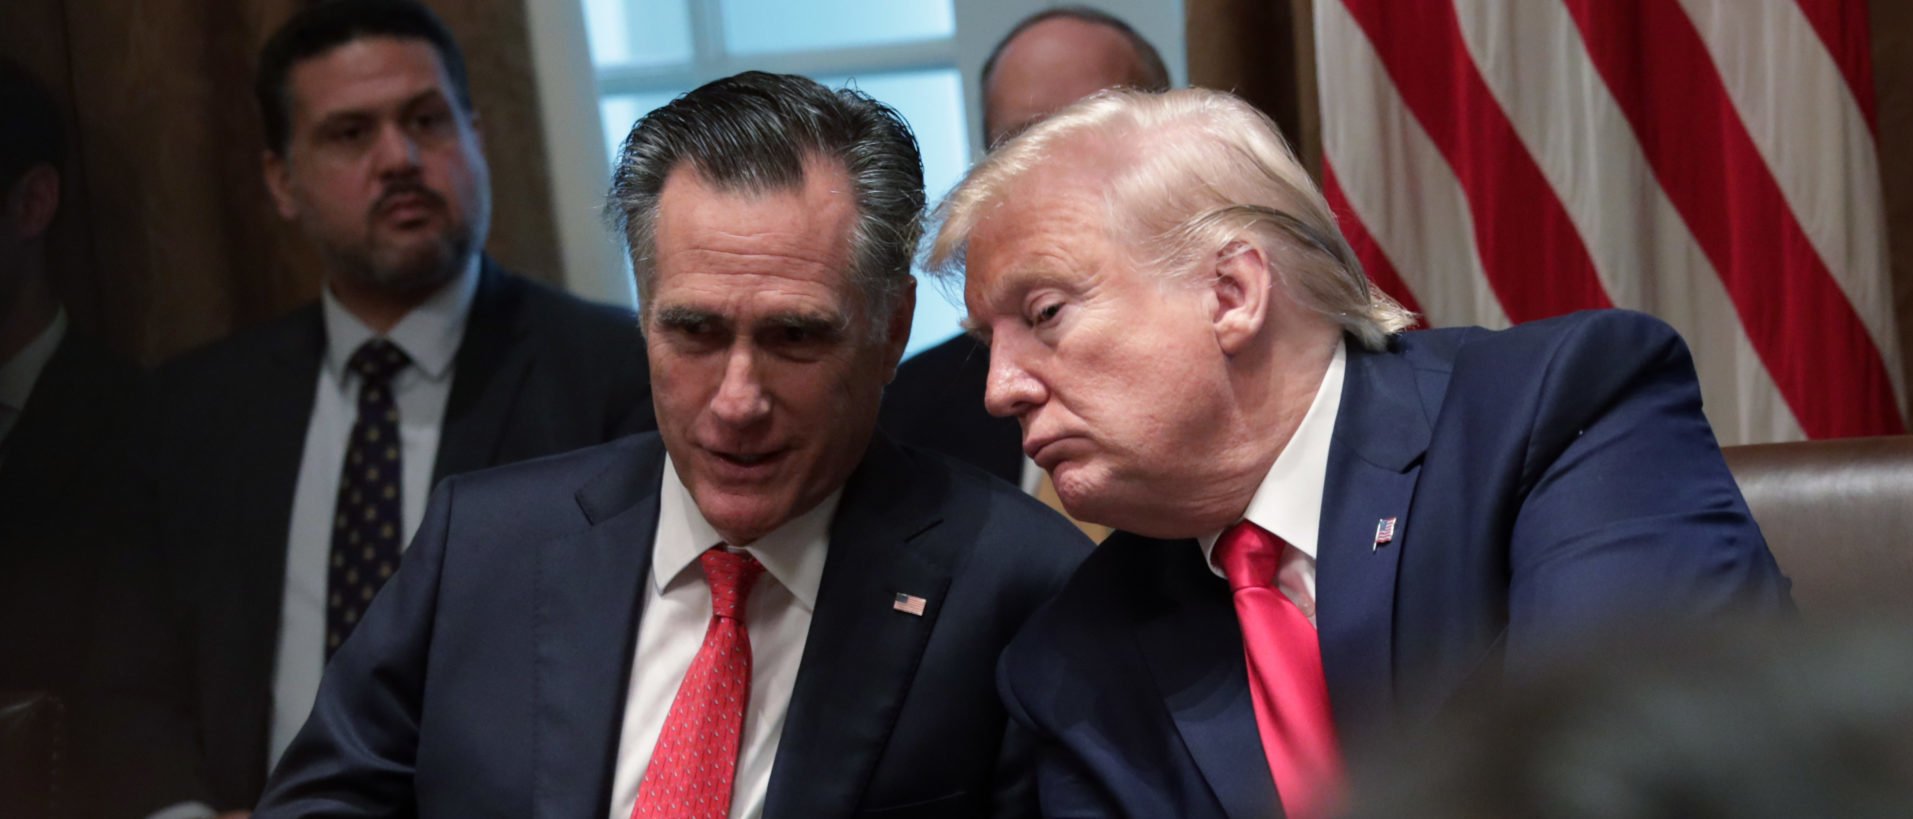 WASHINGTON, DC - NOVEMBER 22: U.S. President Donald Trump (R) listens to Sen. Mitt Romney (R-UT) (L) during a listening session on youth vaping of electronic cigarette on November 22, 2019 in the Cabinet Room of the White House in Washington, DC. President Trump met with business and concern group leaders to discuss on how to regulate vaping products and keep youth away from them. (Photo by Alex Wong/Getty Images)